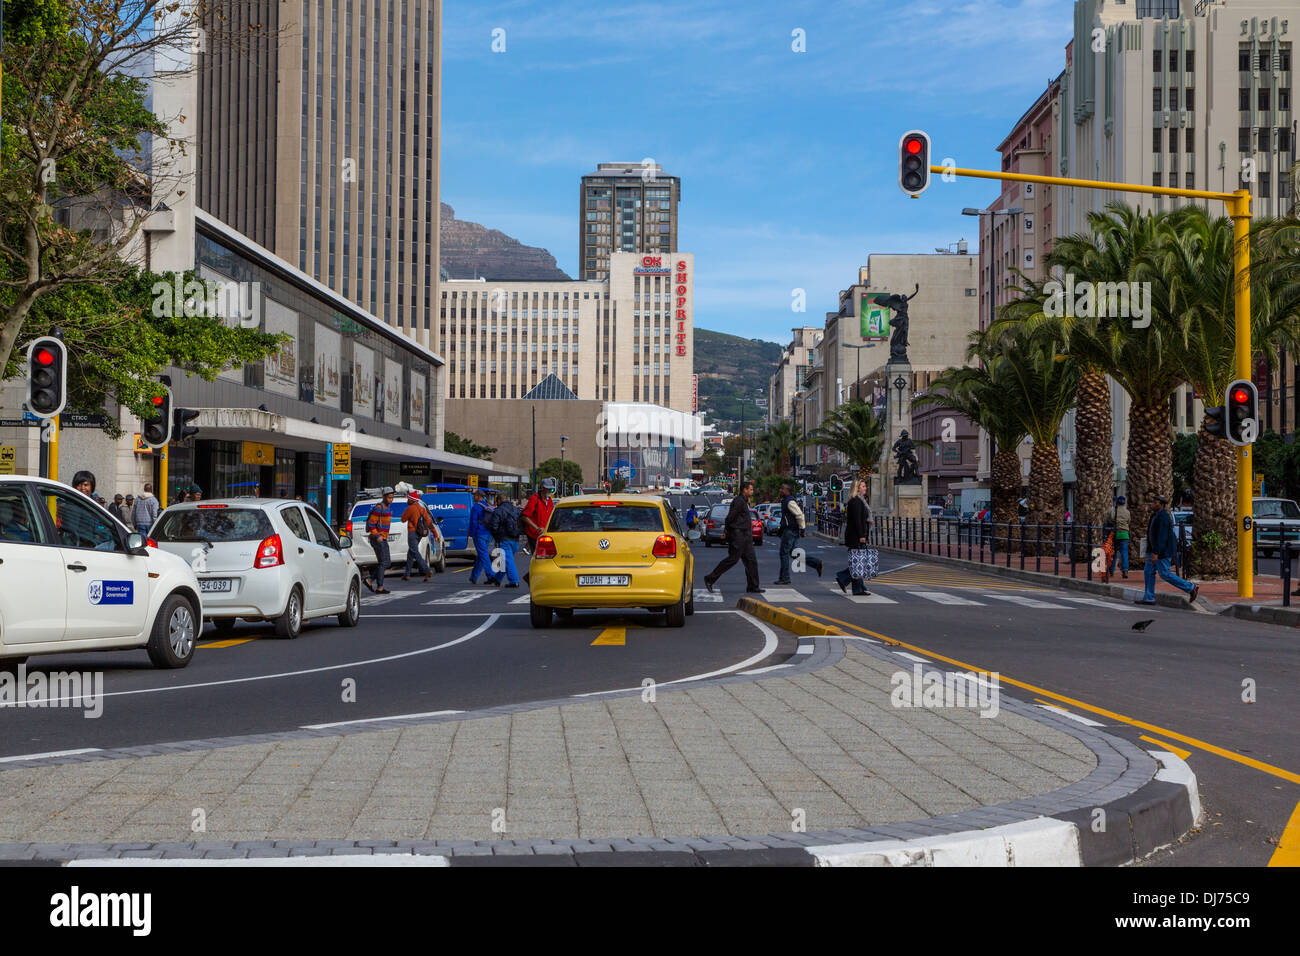 South Africa, Cape Town Central Business District. Adderley Street. Stock Photo